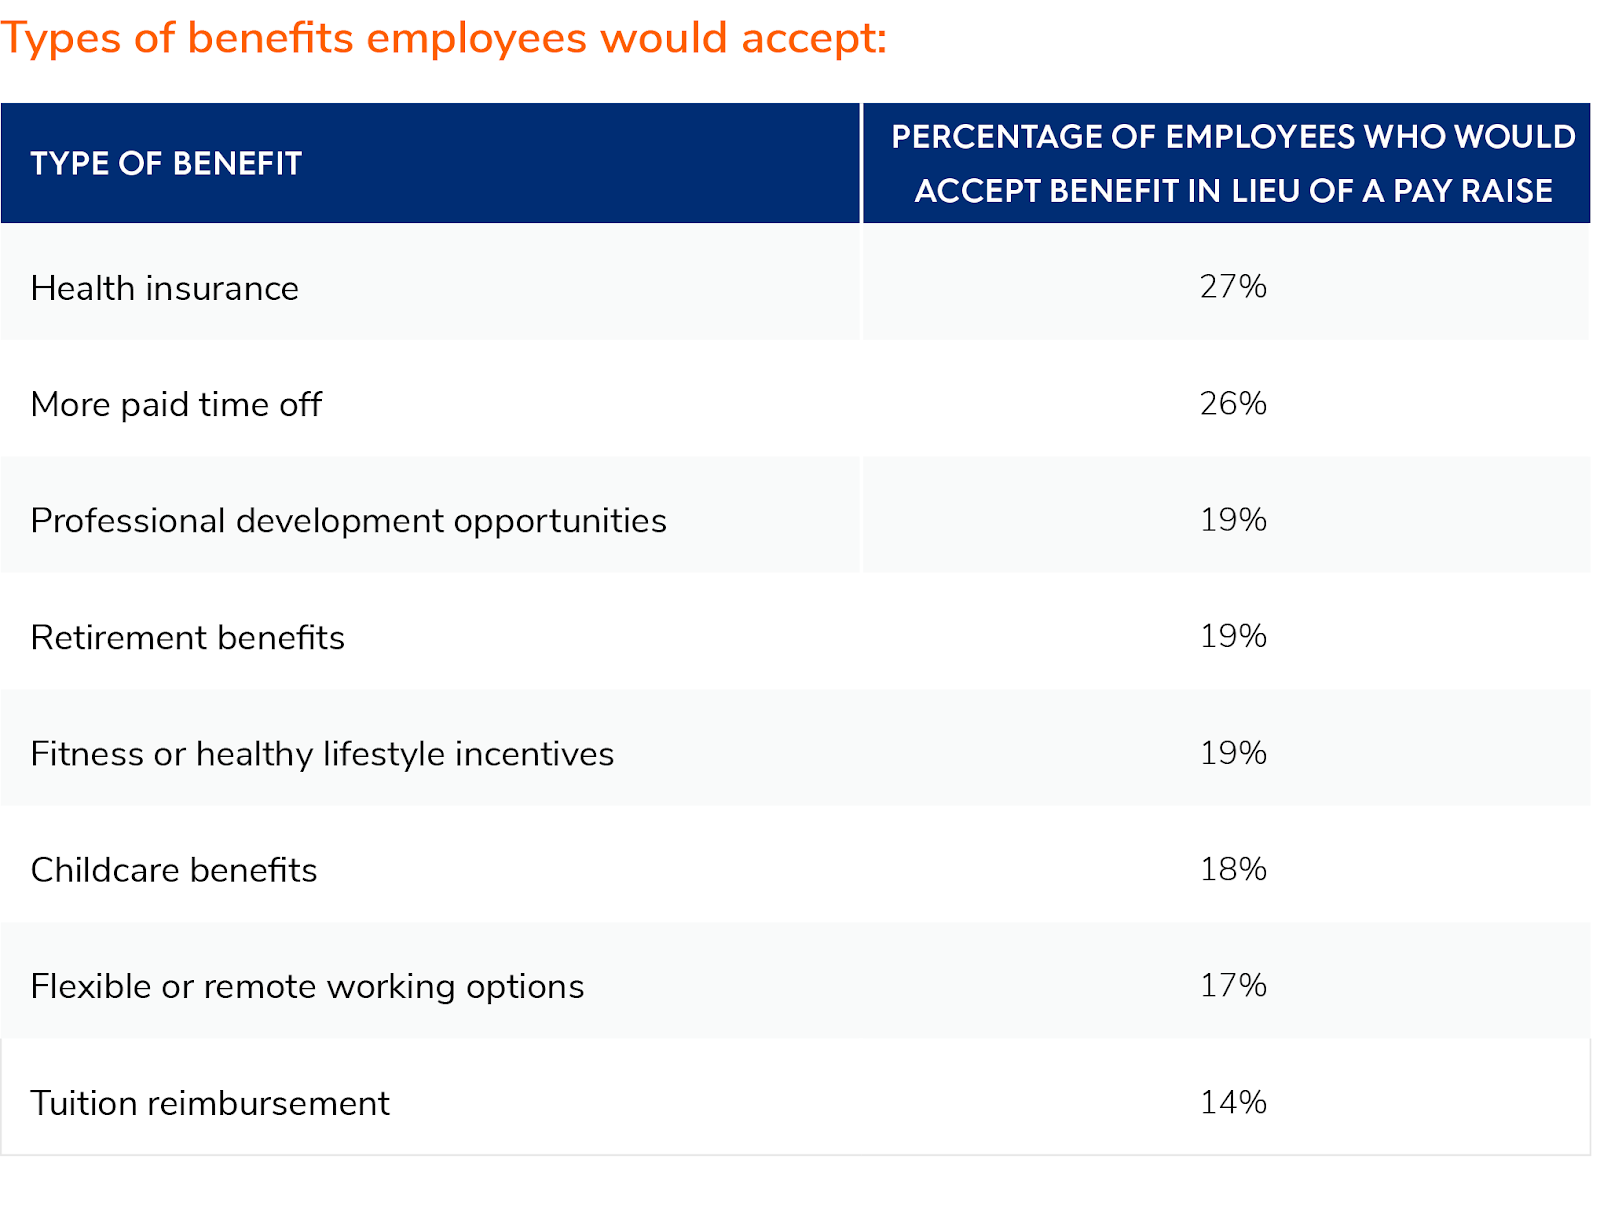 benefits employees would accept in lieu of pay raise 